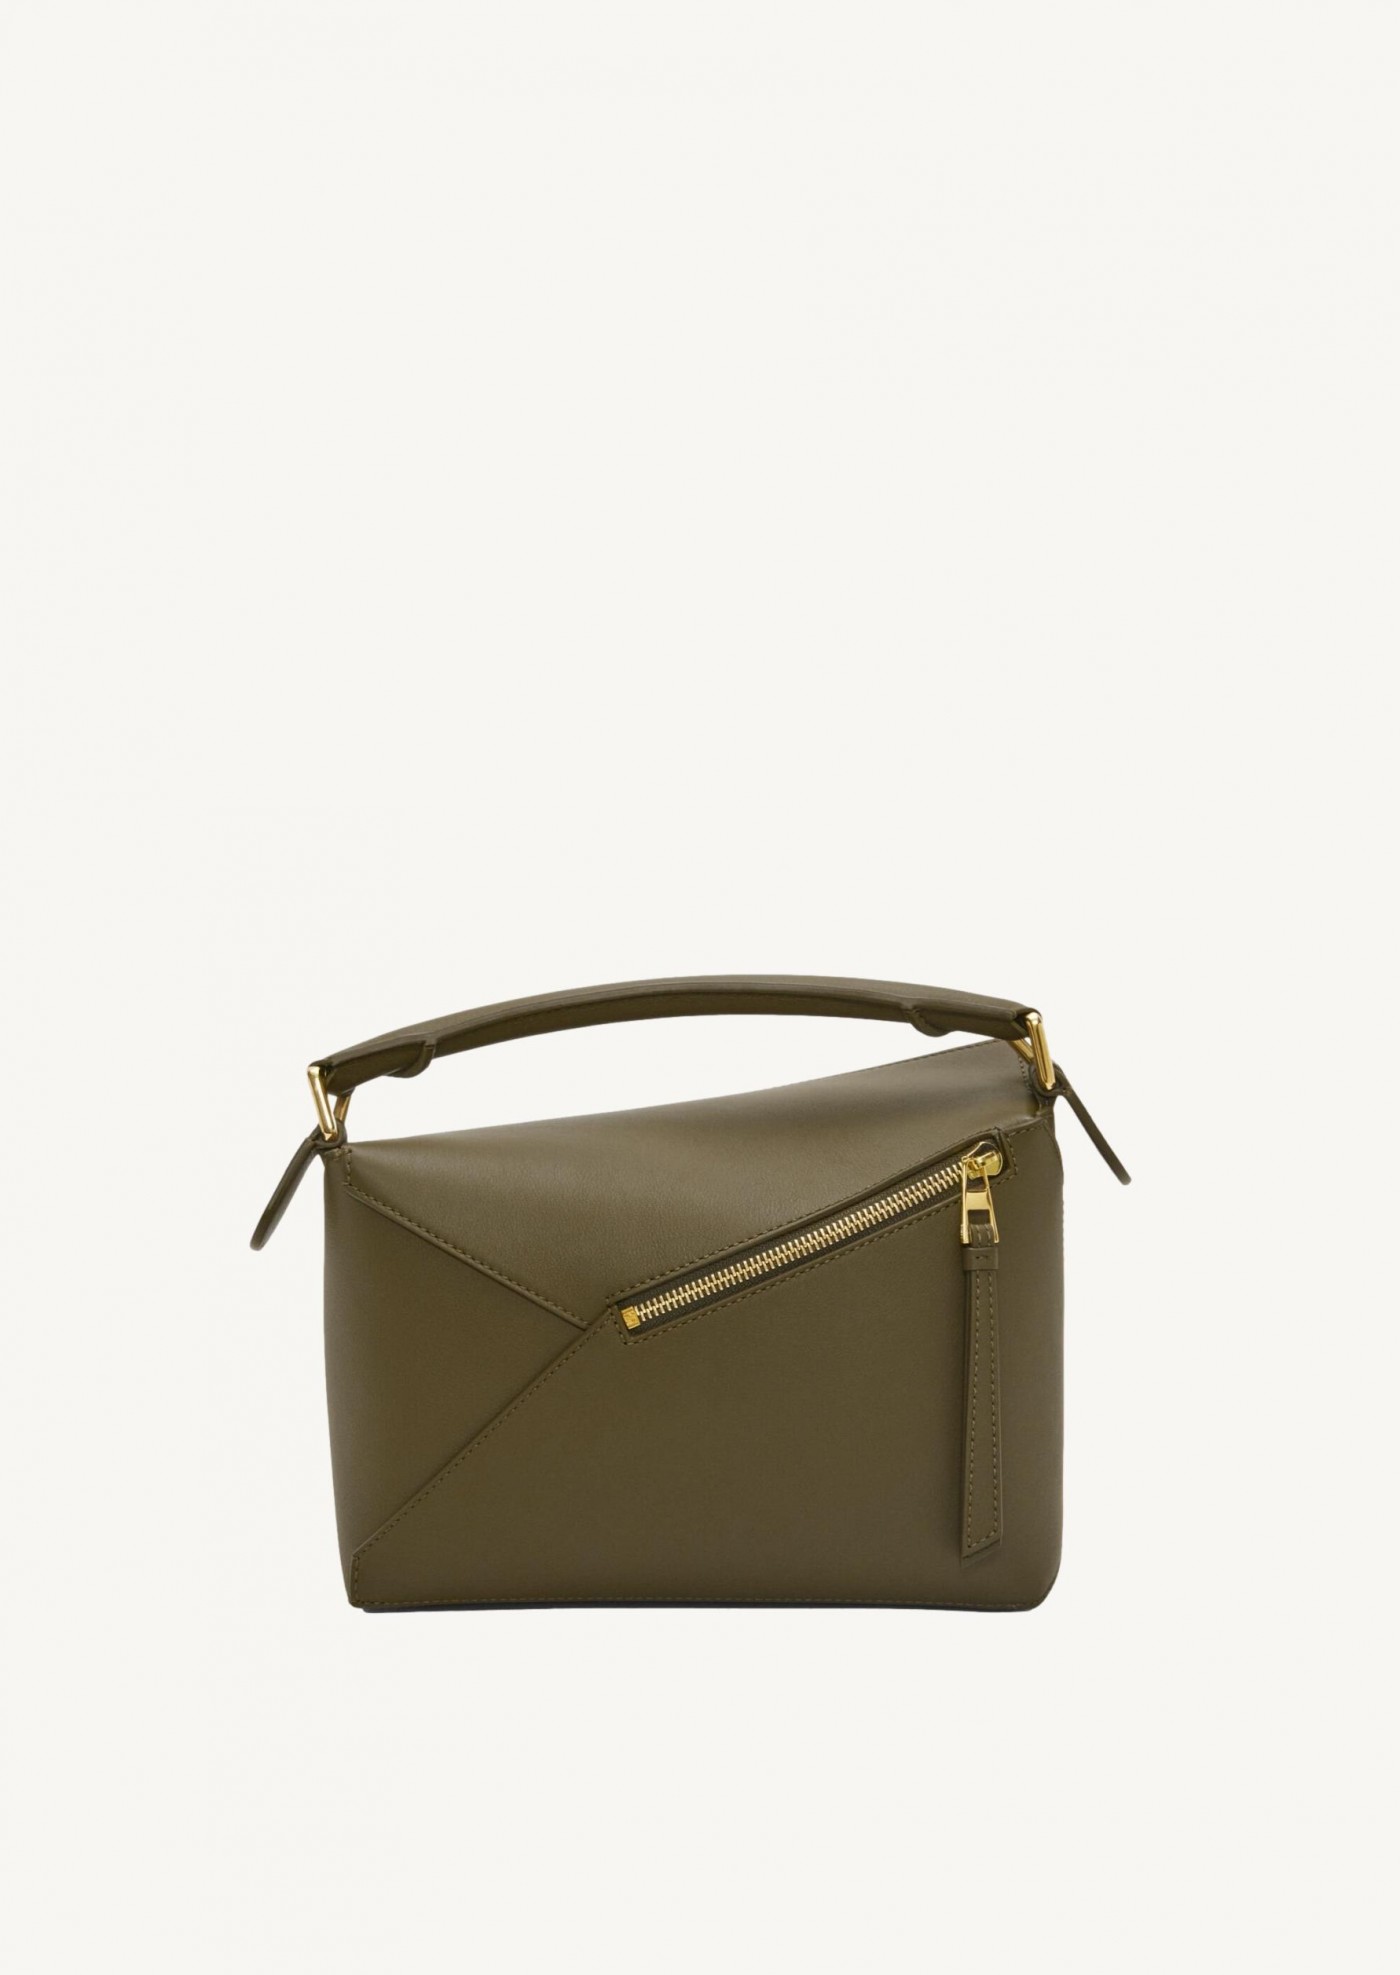 Small puzzle bag in khaki calf leather